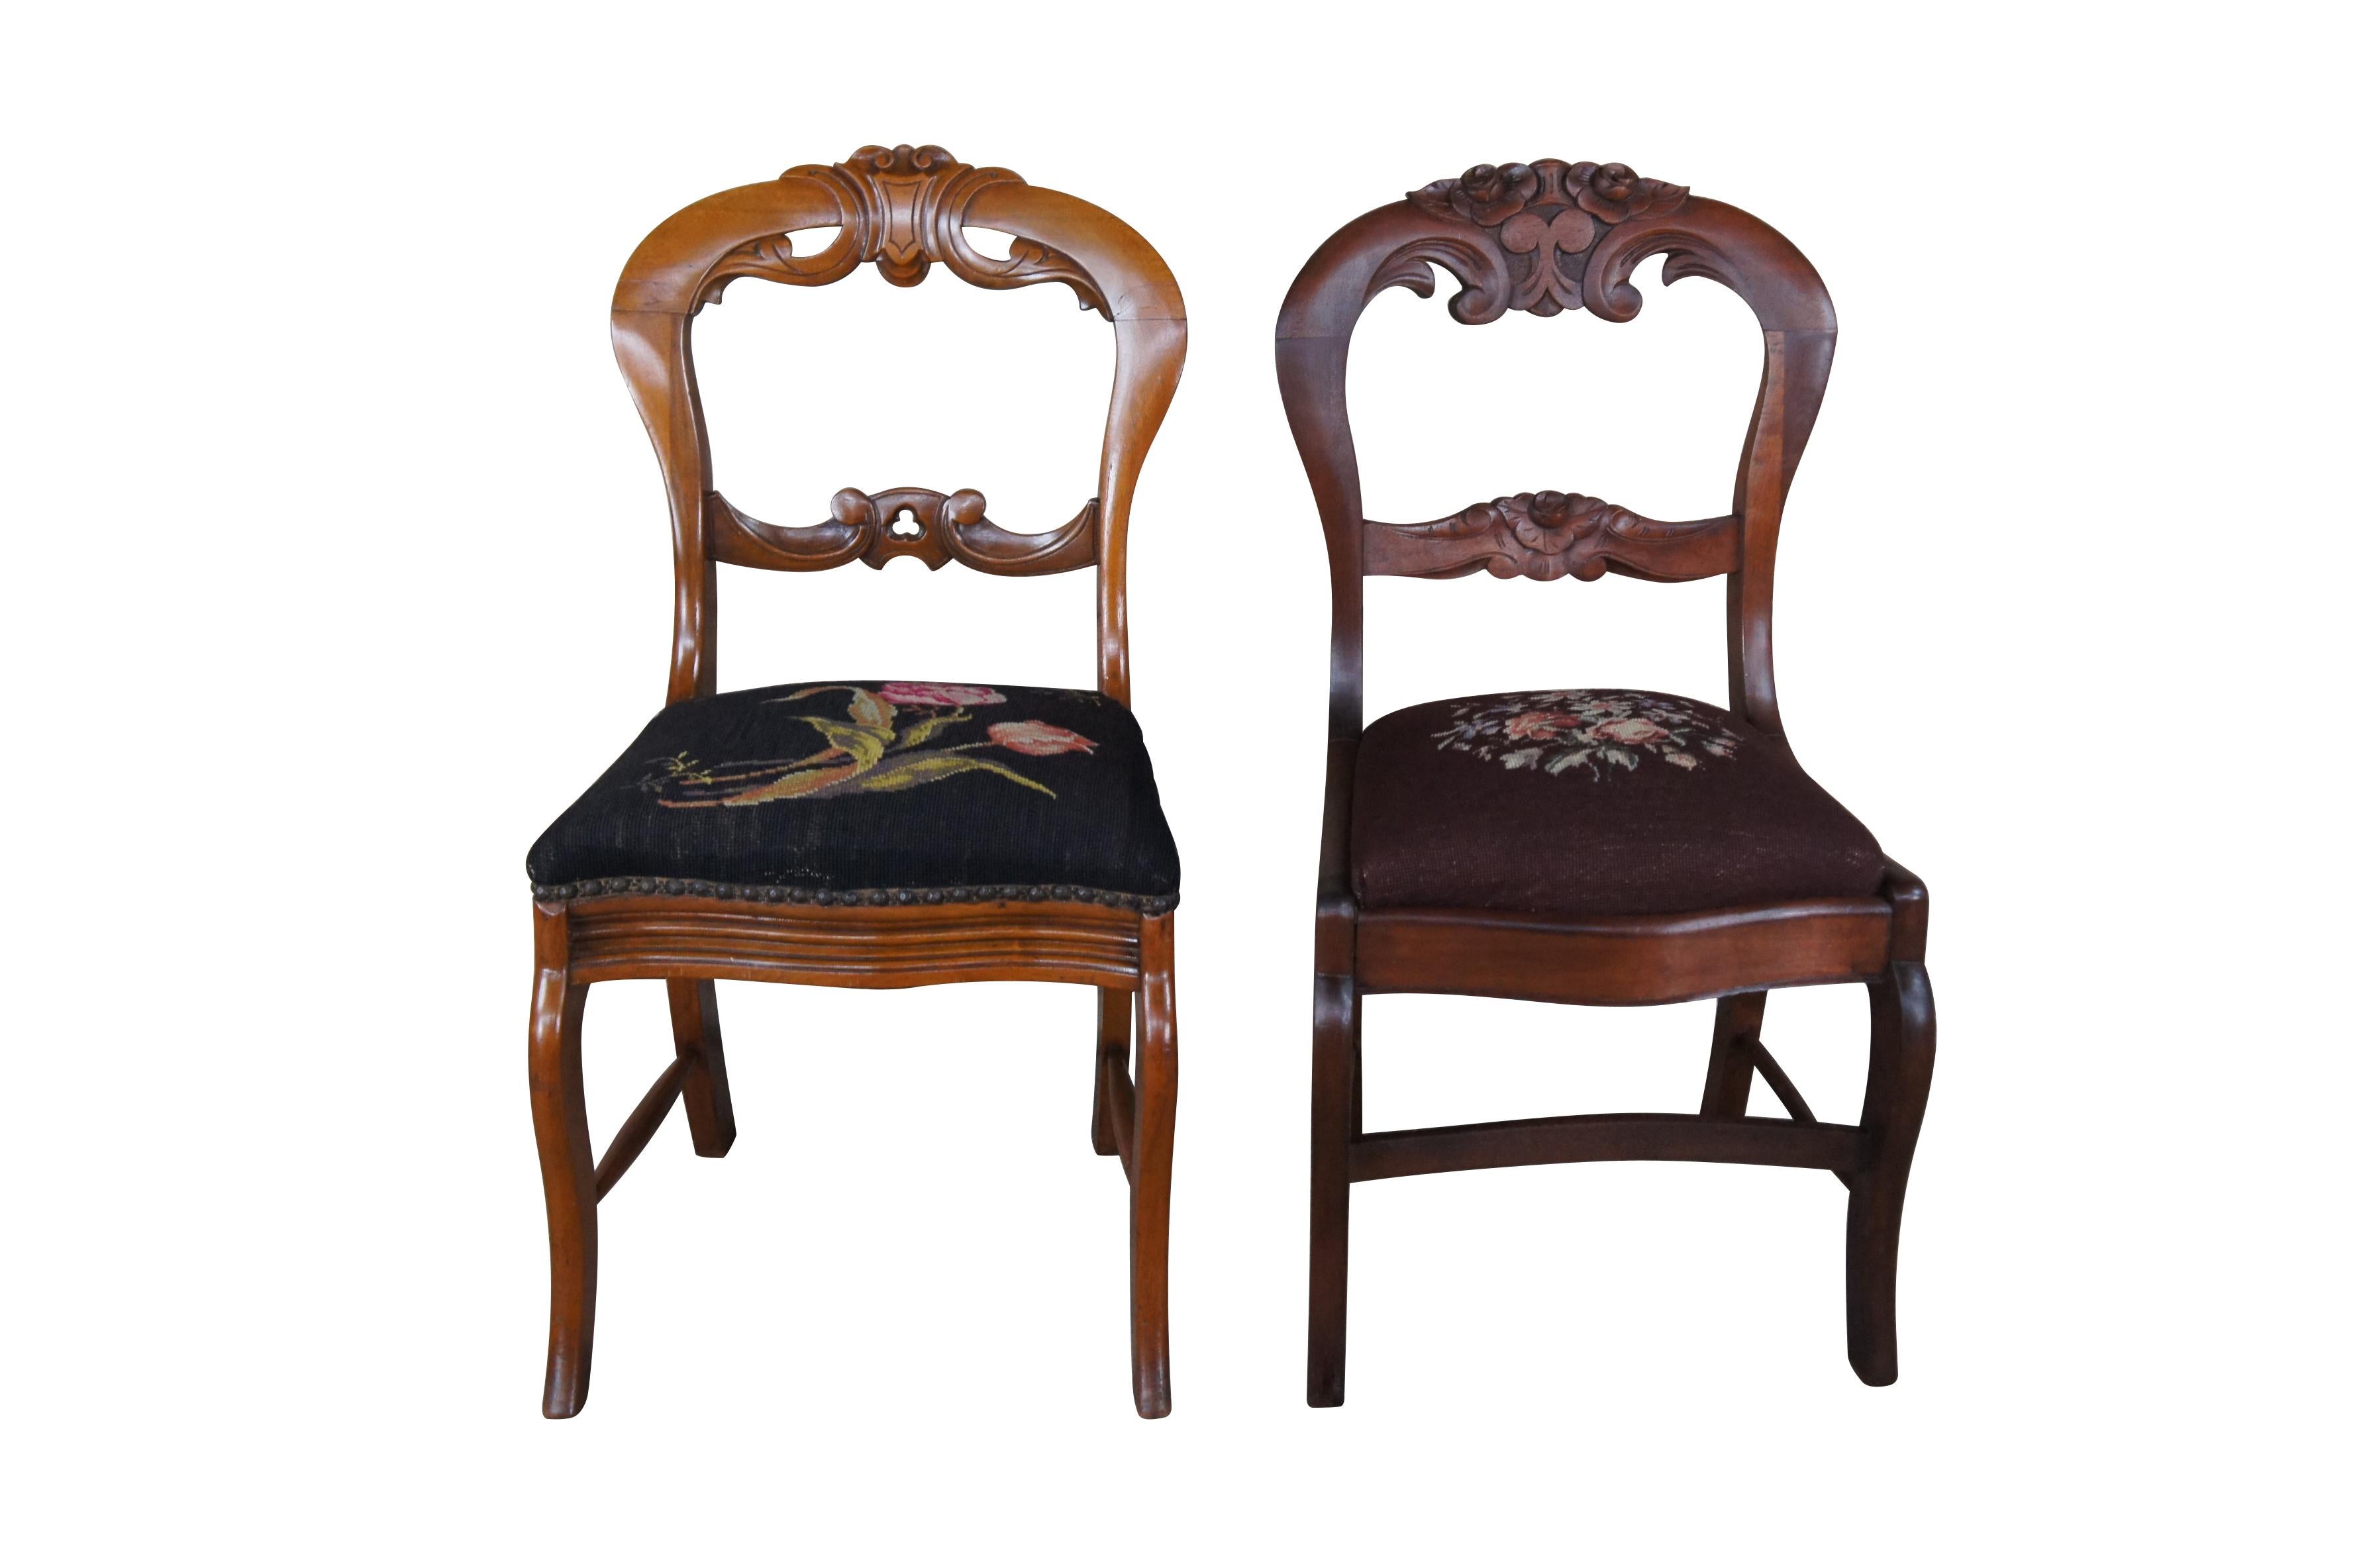 4 Antique Victorian Carved Mahogany Balloon Back Side Chairs Needlepoint Seat In Good Condition For Sale In Dayton, OH